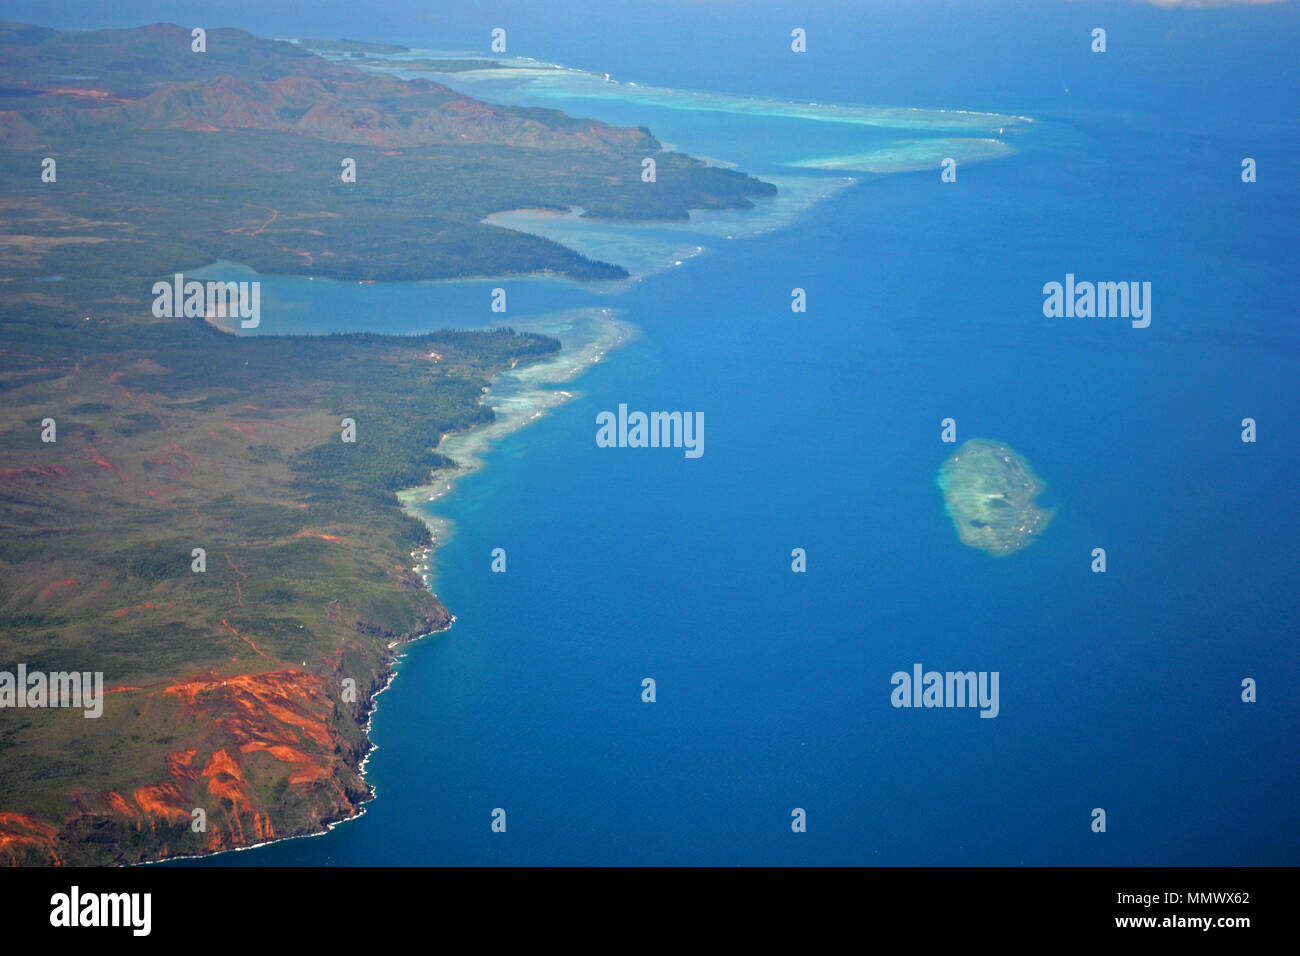 Aerial view of the coastline around Port-Boise Bay and Goro Bay, New Caledonia, South Pacific Stock Photo